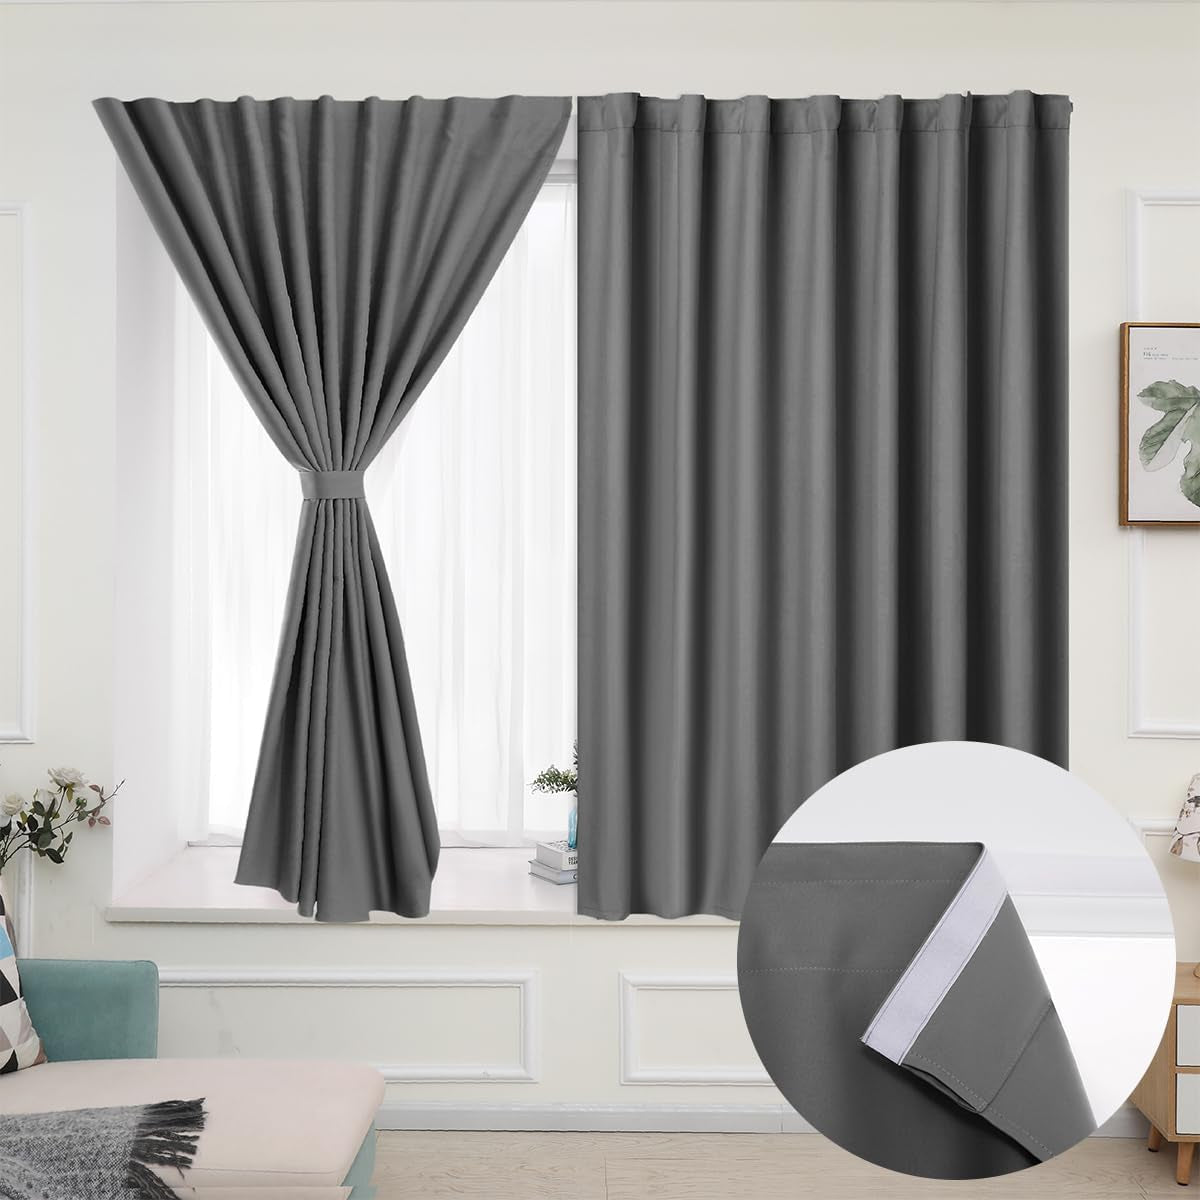 Muamar 2Pcs Blackout Curtains Privacy Curtains 63 Inch Length Window Curtains,Easy Install Thermal Insulated Window Shades,Stick Curtains No Rods, Black 42" W X 63" L  Muamar Grey 42"W X 63"L 